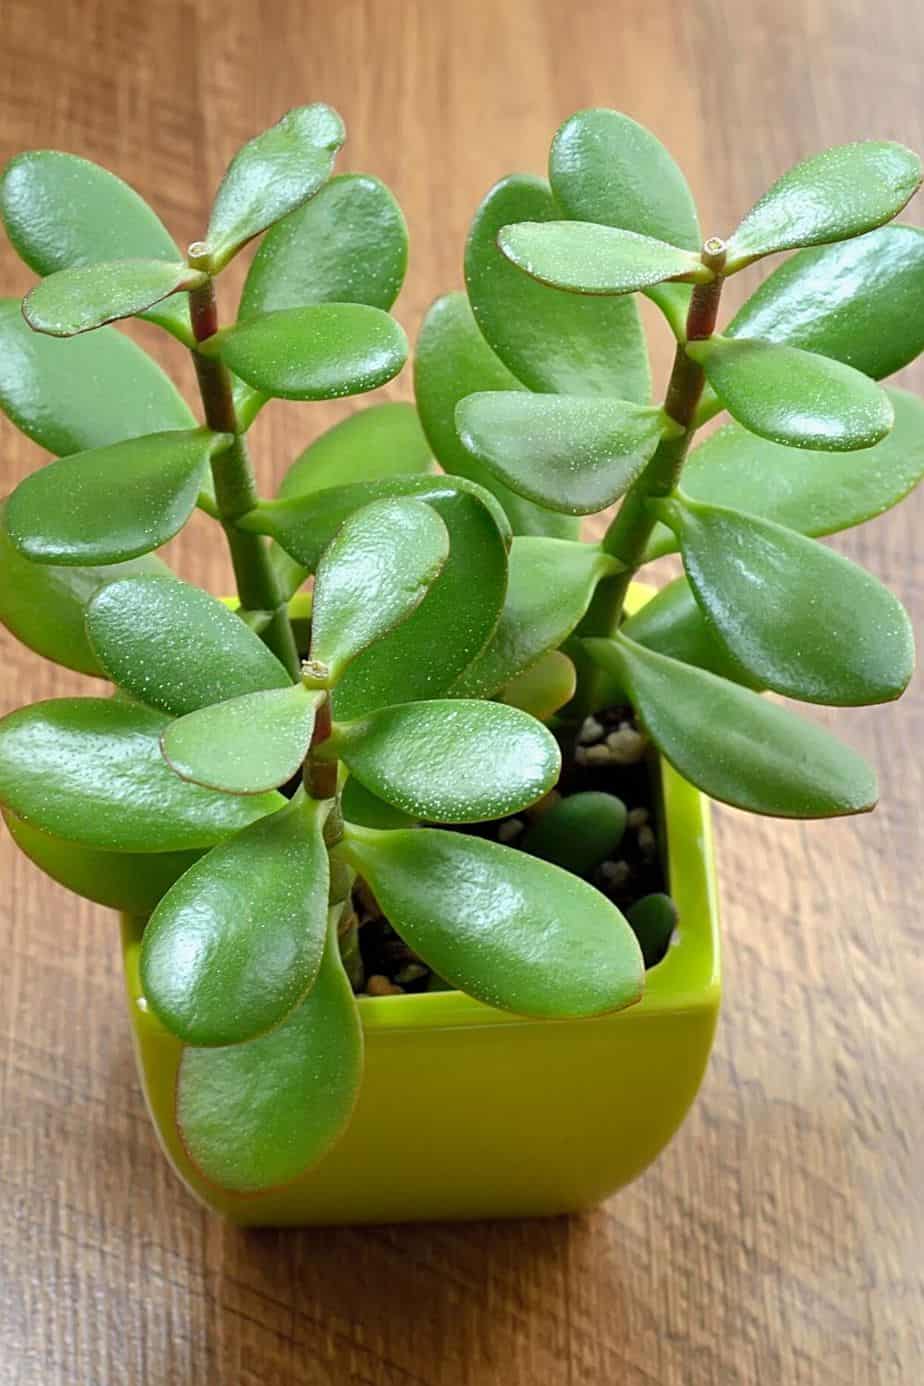 Jade Plant is toxic for cats and dogs, but the cause of its toxicity is still unknown